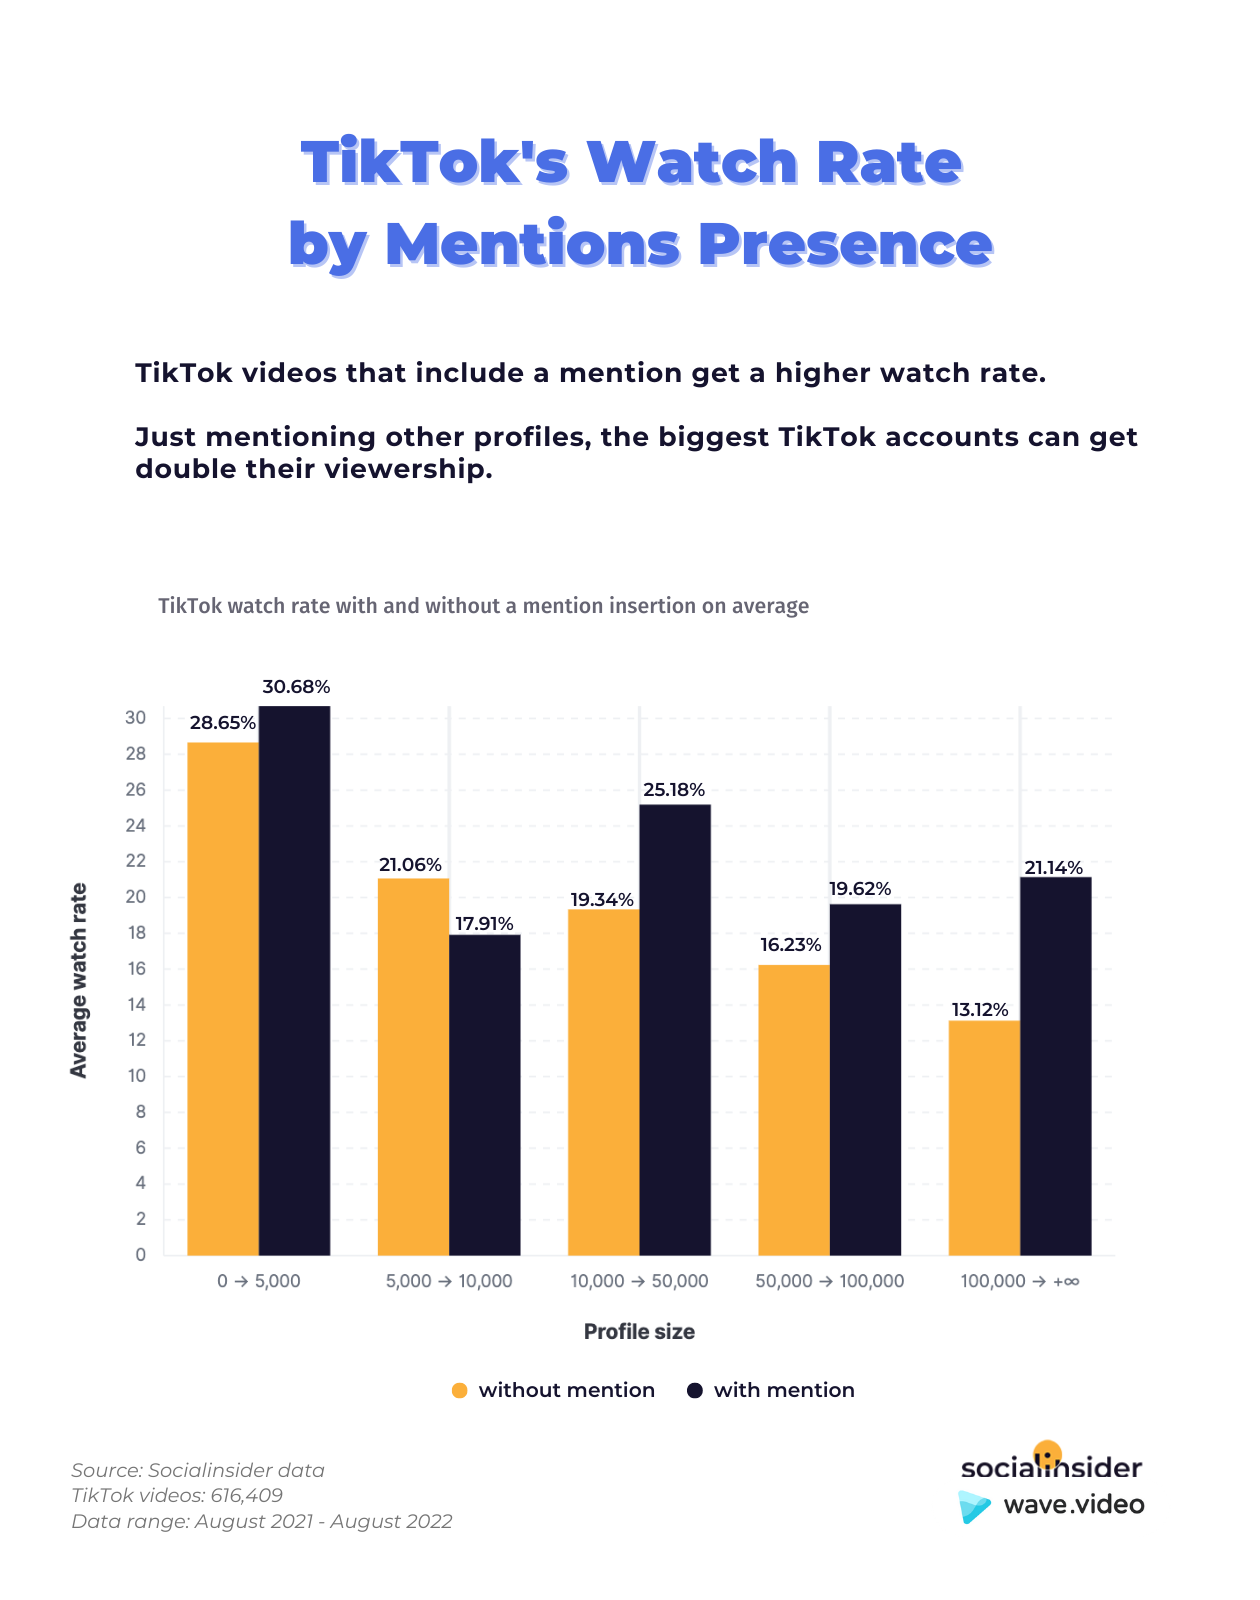 Here is a chart showing how mentions influence the TikTok watch rate.